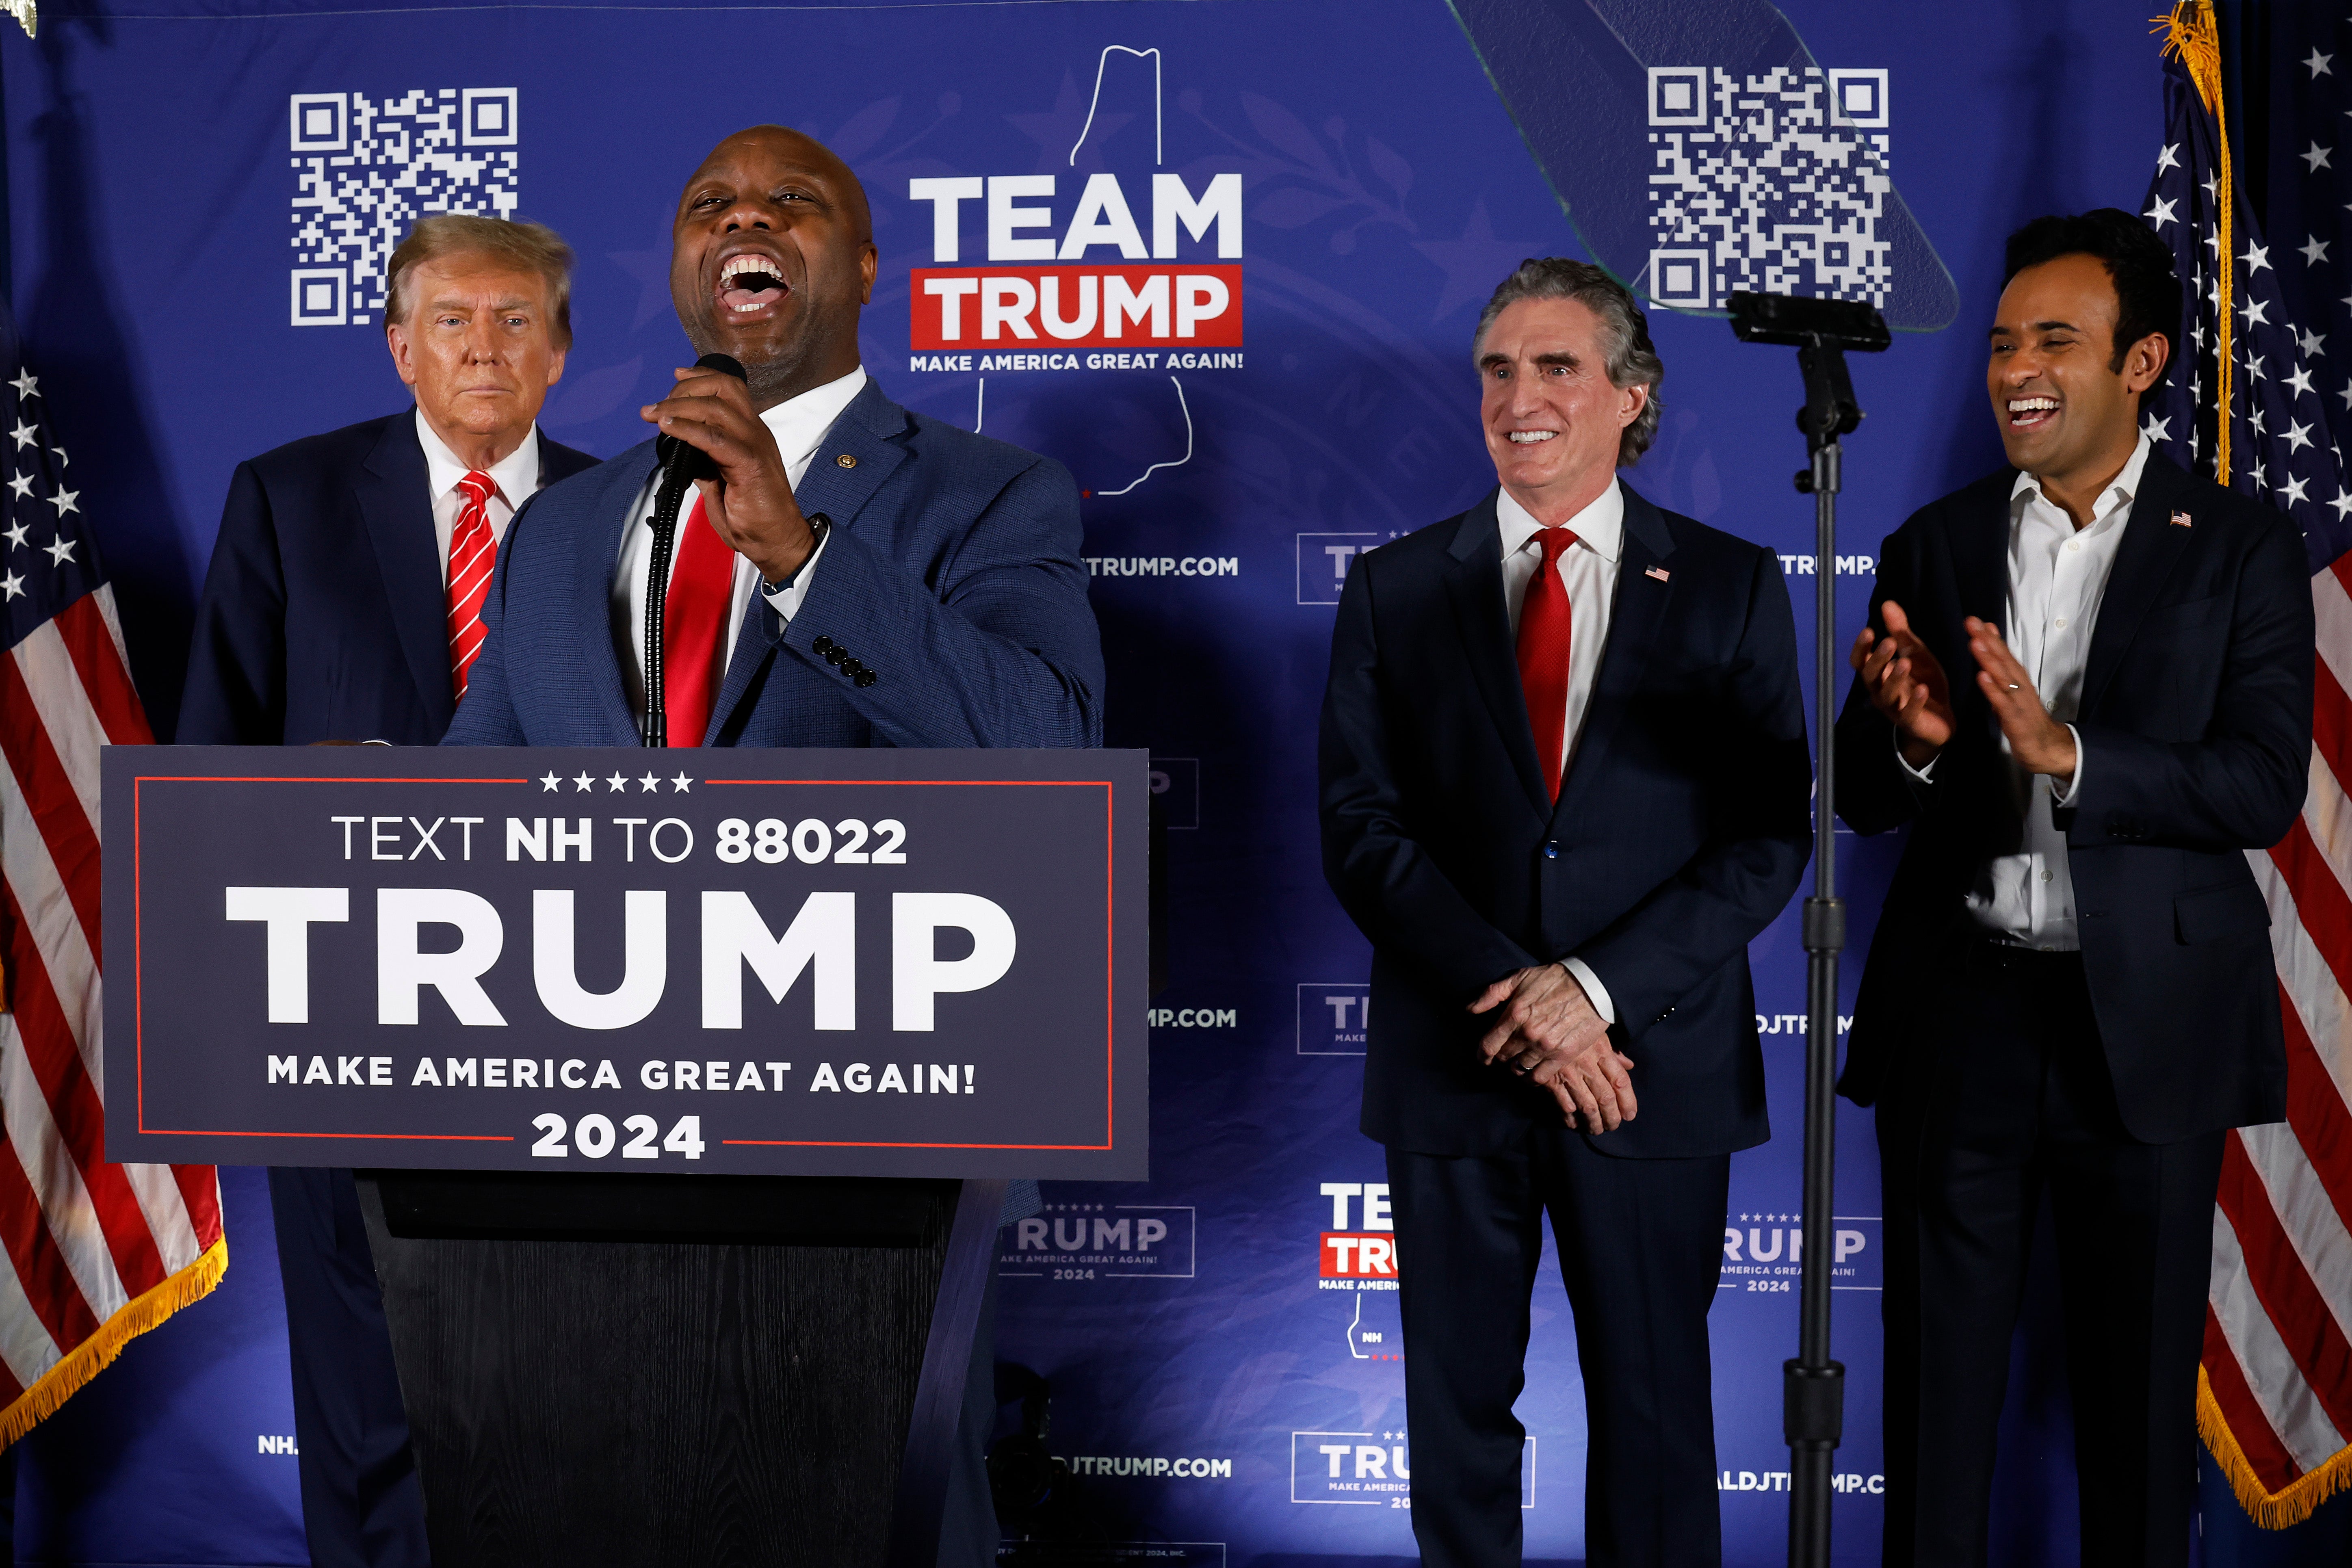 Tim Scott, Doug Burgum, and Vivek Ramaswamy have all attended a number of events with former President Donald Trump recently